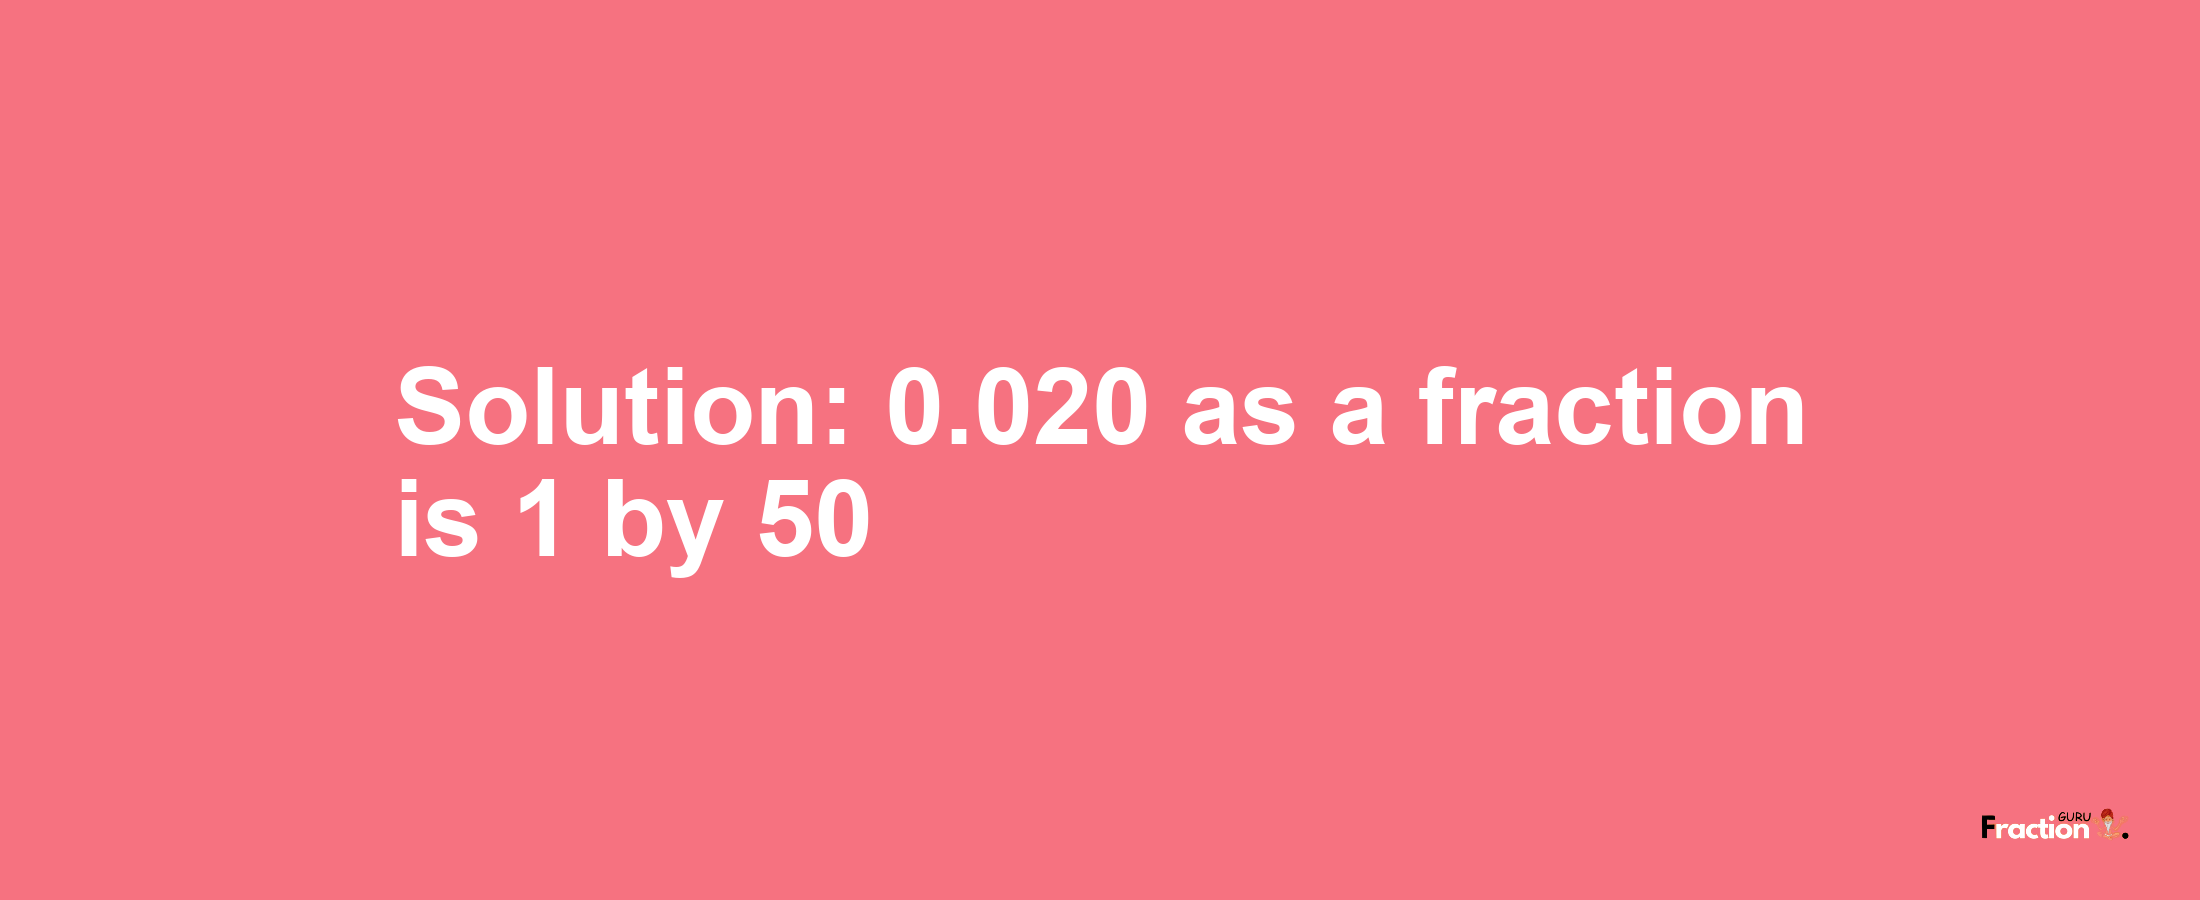 Solution:0.020 as a fraction is 1/50